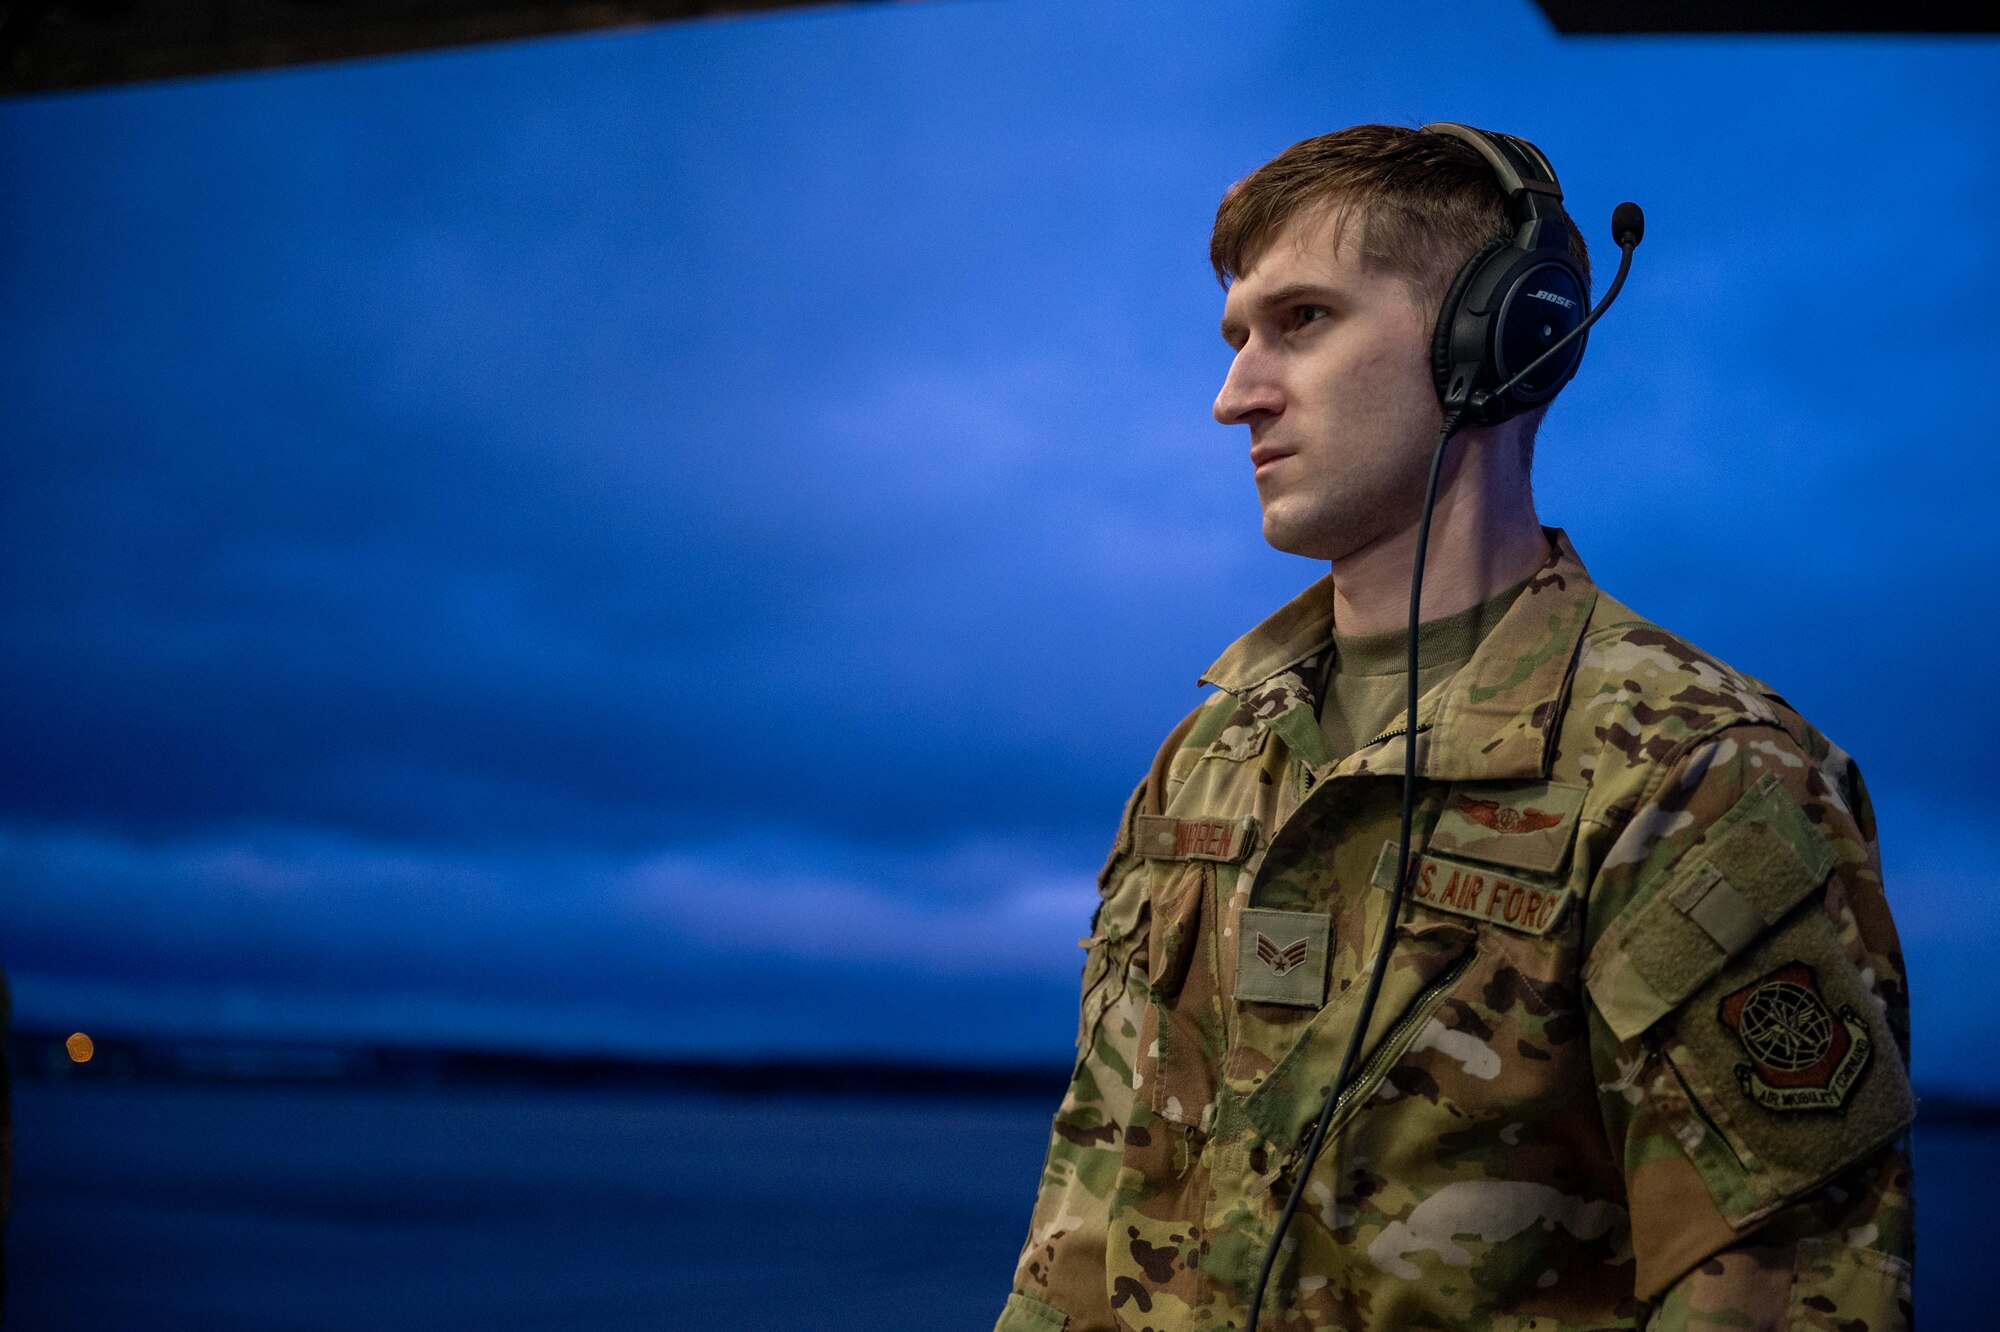 Senior Airman Matthew Warren, 3rd Airlift Squadron loadmaster, prepares to unload a CH-47F Chinook helicopter from a C-17 Globemaster III assigned to Dover Air Force Base, Delaware, during a foreign military sales mission, Torrejón Air Base, Spain, Jan. 16, 2023. The United States and Spain recognize the central importance of the NATO alliance in ensuring transatlantic peace and security. As NATO Allies for 40 years, the U.S. and Spain are steadfastly committed to providing NATO with ready forces and capabilities, strengthening transatlantic ties. (U.S. Air Force photo by Senior Airman Faith Barron)